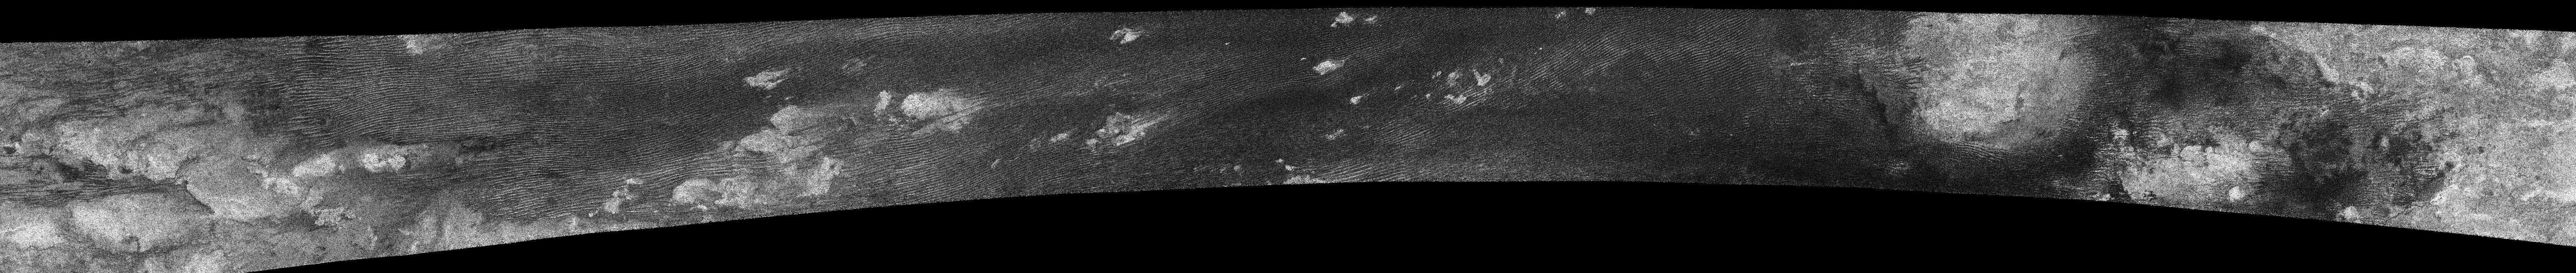 Titan's dunes, from Oct. 28, 2005 flyby